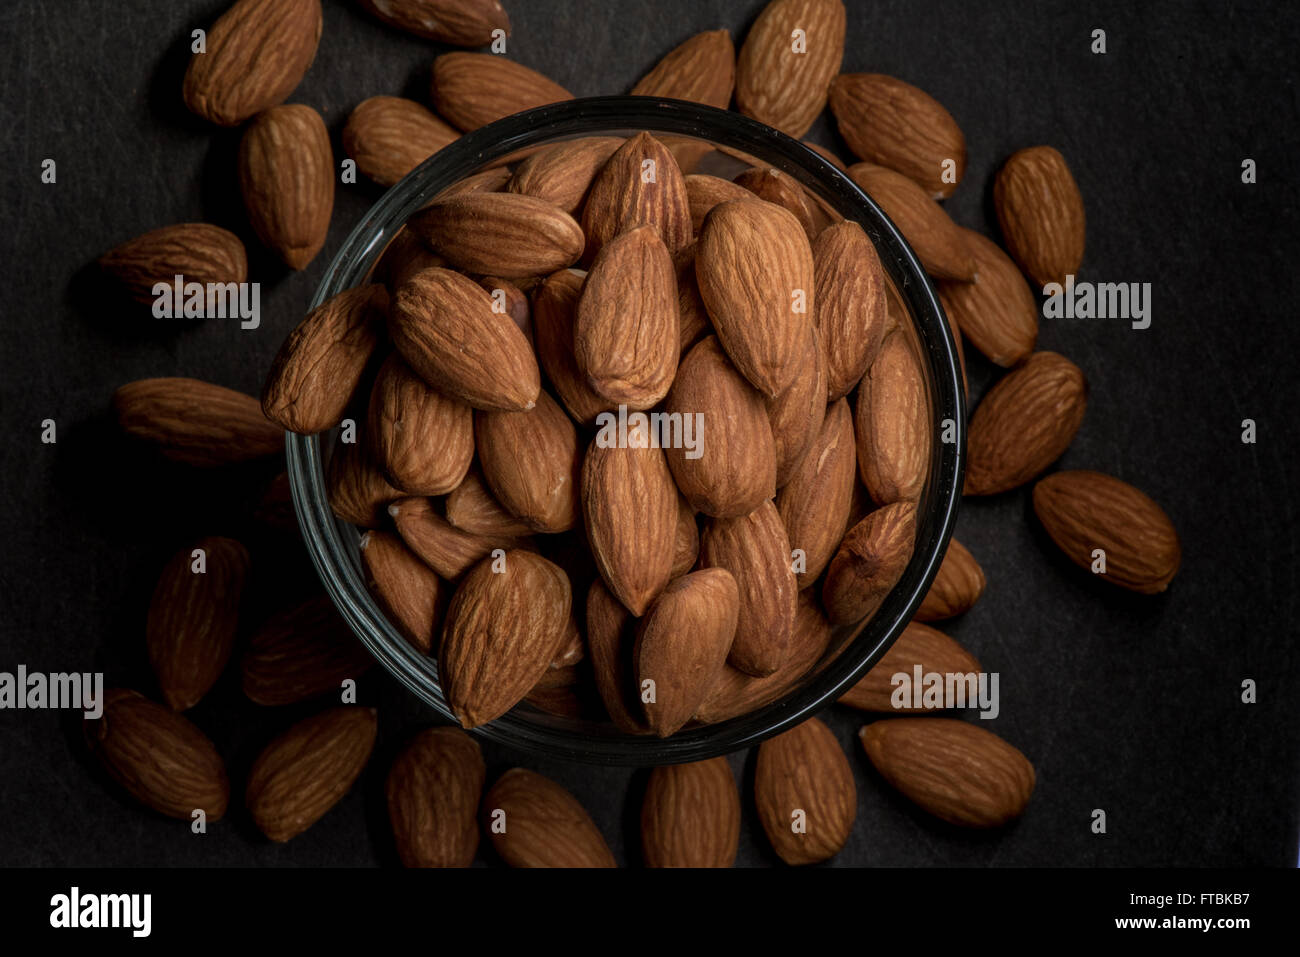 Whole Almonds Spill Over Glass Bowl with lighting on the center Stock Photo